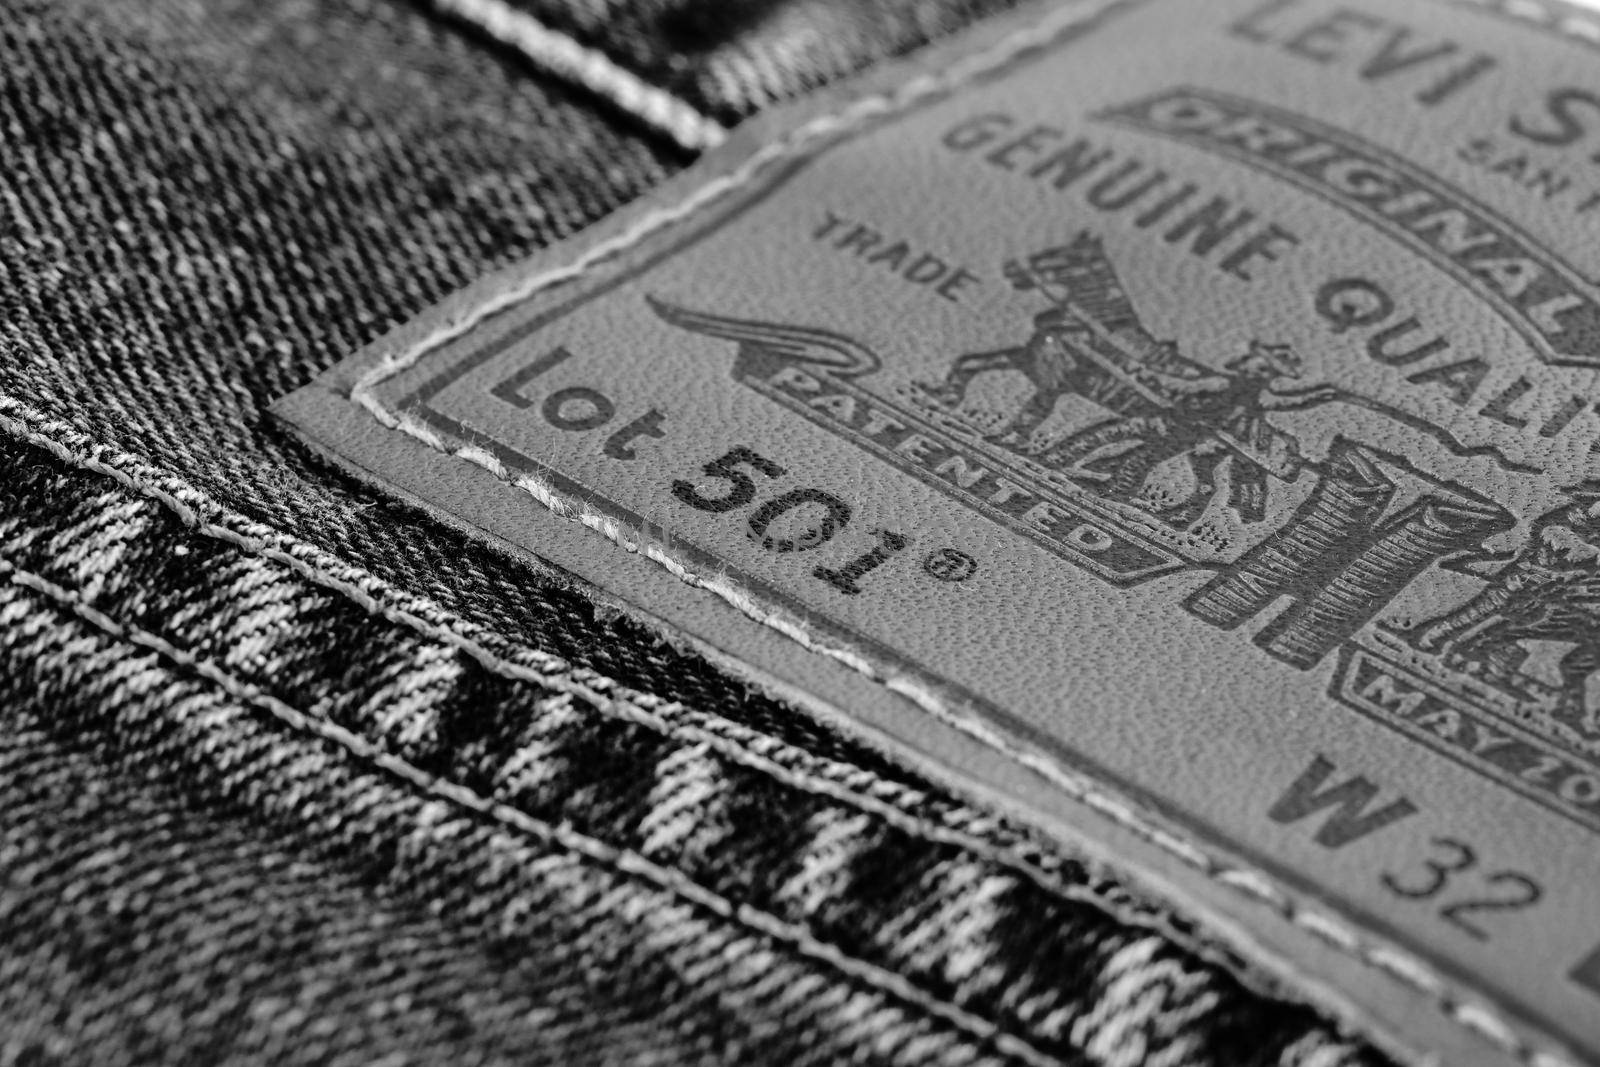 Close up of the details of new LEVI'S 501 Jeans. Seams and denim texture close-up. Classic jeans model. LEVI'S is a brand name of Levi Strauss and Co, founded in 1853. 31.12.2021, Rostov, Russia by EvgeniyQW